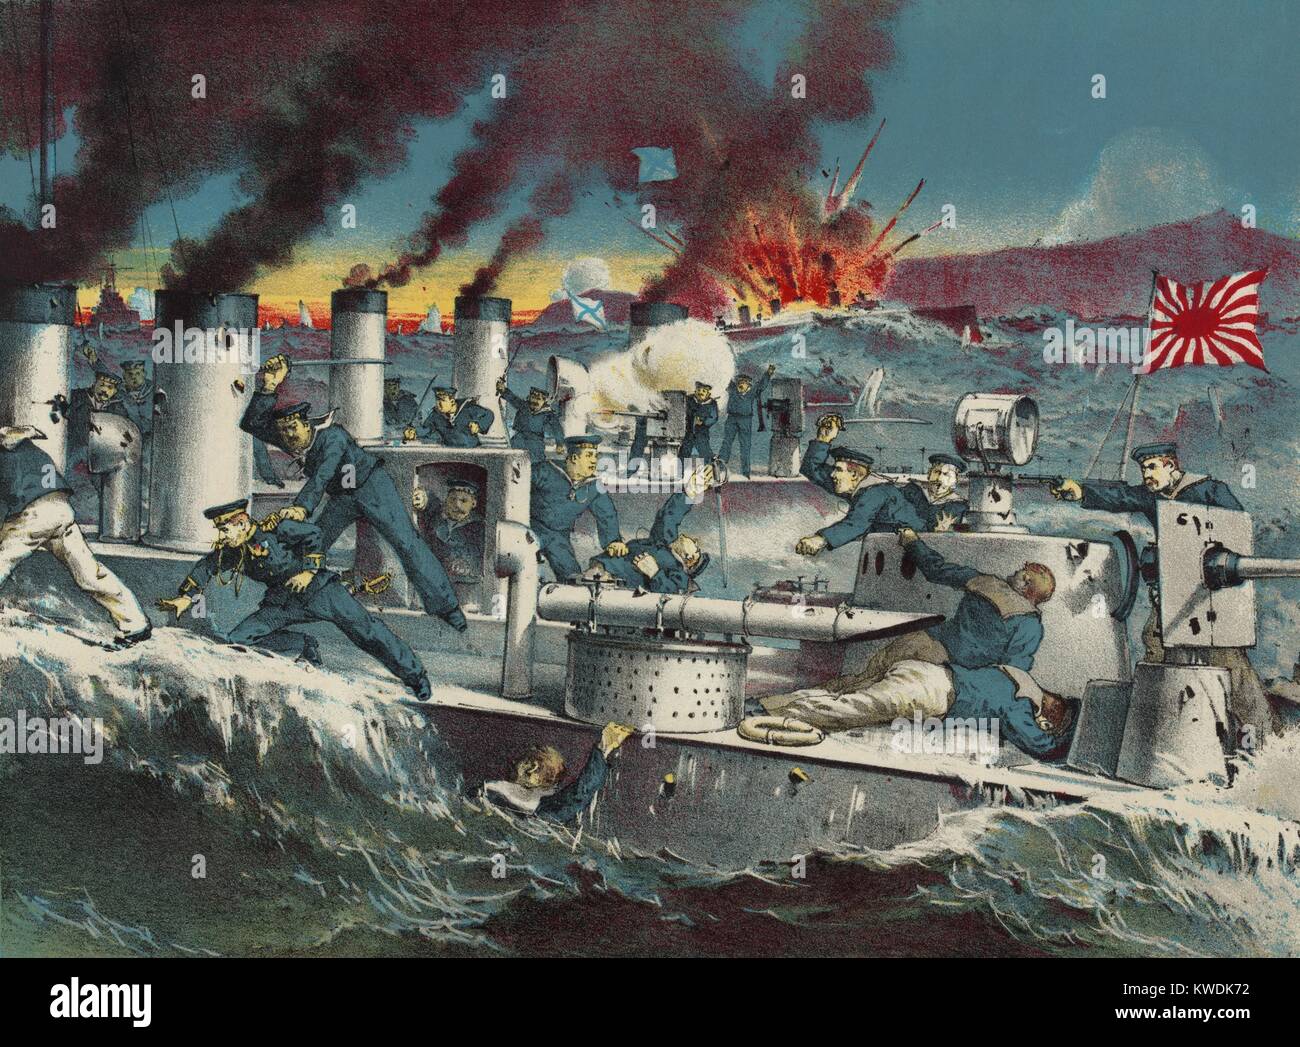 Fighting off Port Arthur during the Russo-Japanese War in April 1904. Sailors from a Japanese torpedo boat, Sazanami, board a Russian torpedo boat. The Japanese blocked the Russian attempt to break out of Port Arthur to join Russian warships at Vladivostok (BSLOC 2017 18 91) Stock Photo